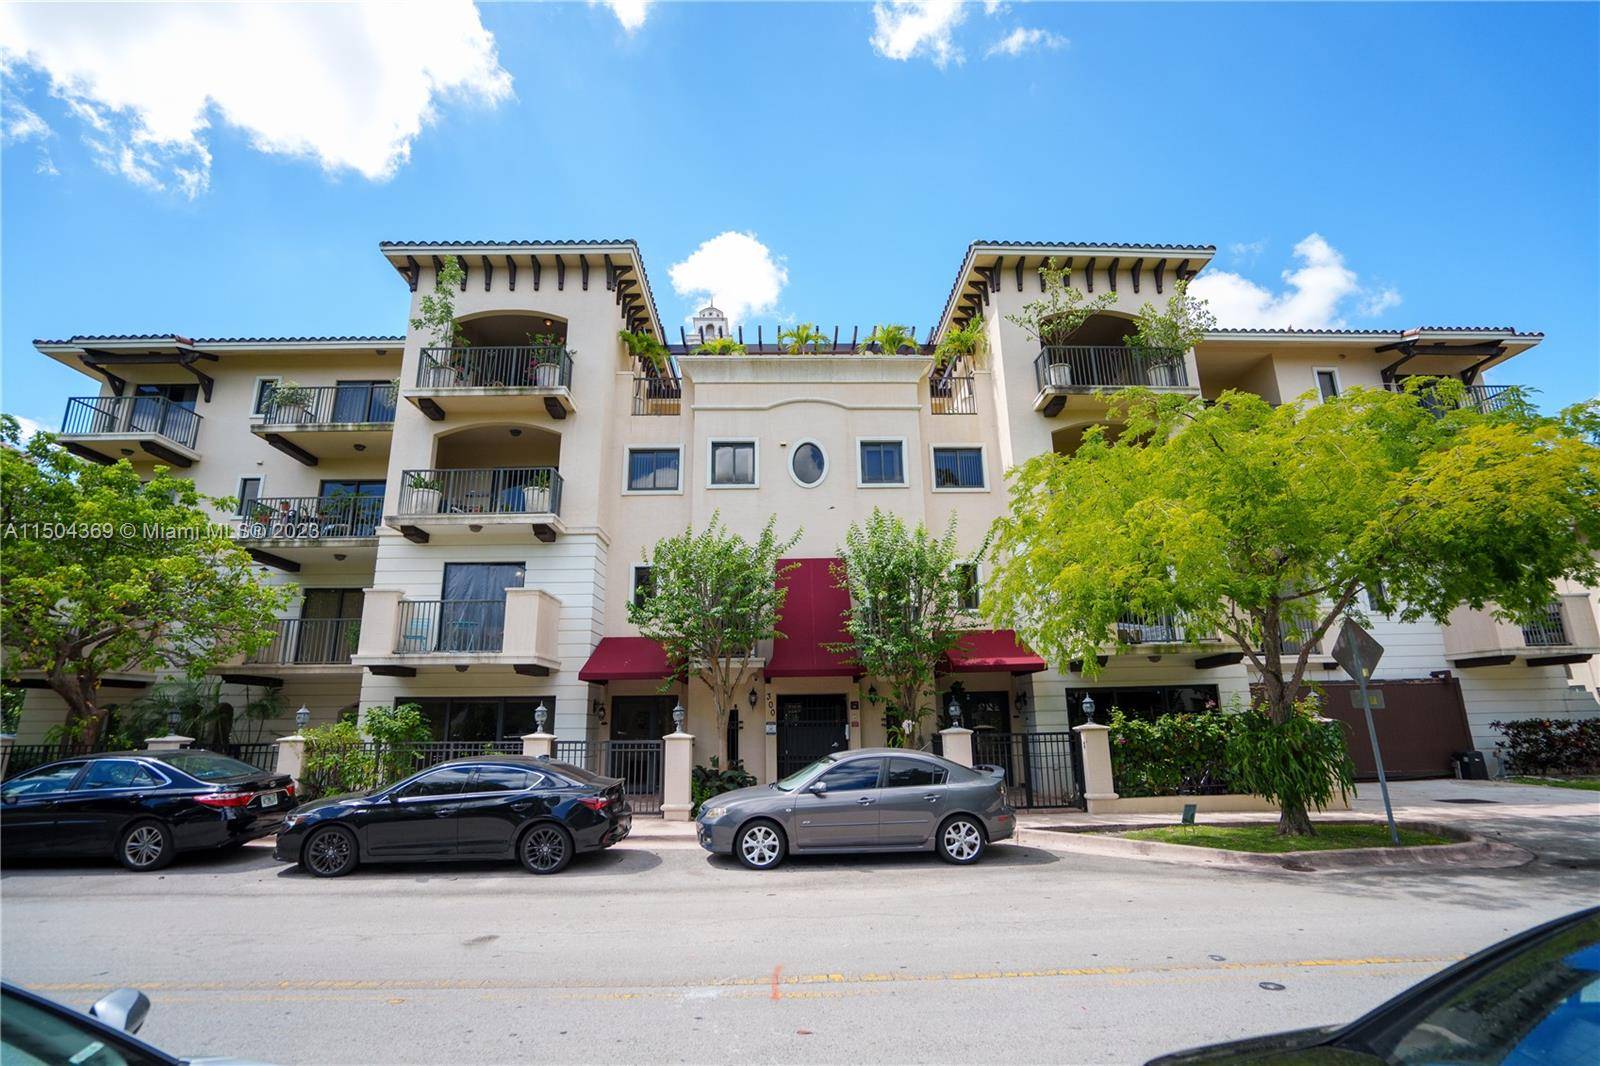 Amazing corner PH 2BD 2BA residence with 500 sqft private terrace overlooking the residential area of the City Beautiful, Coral Gables.